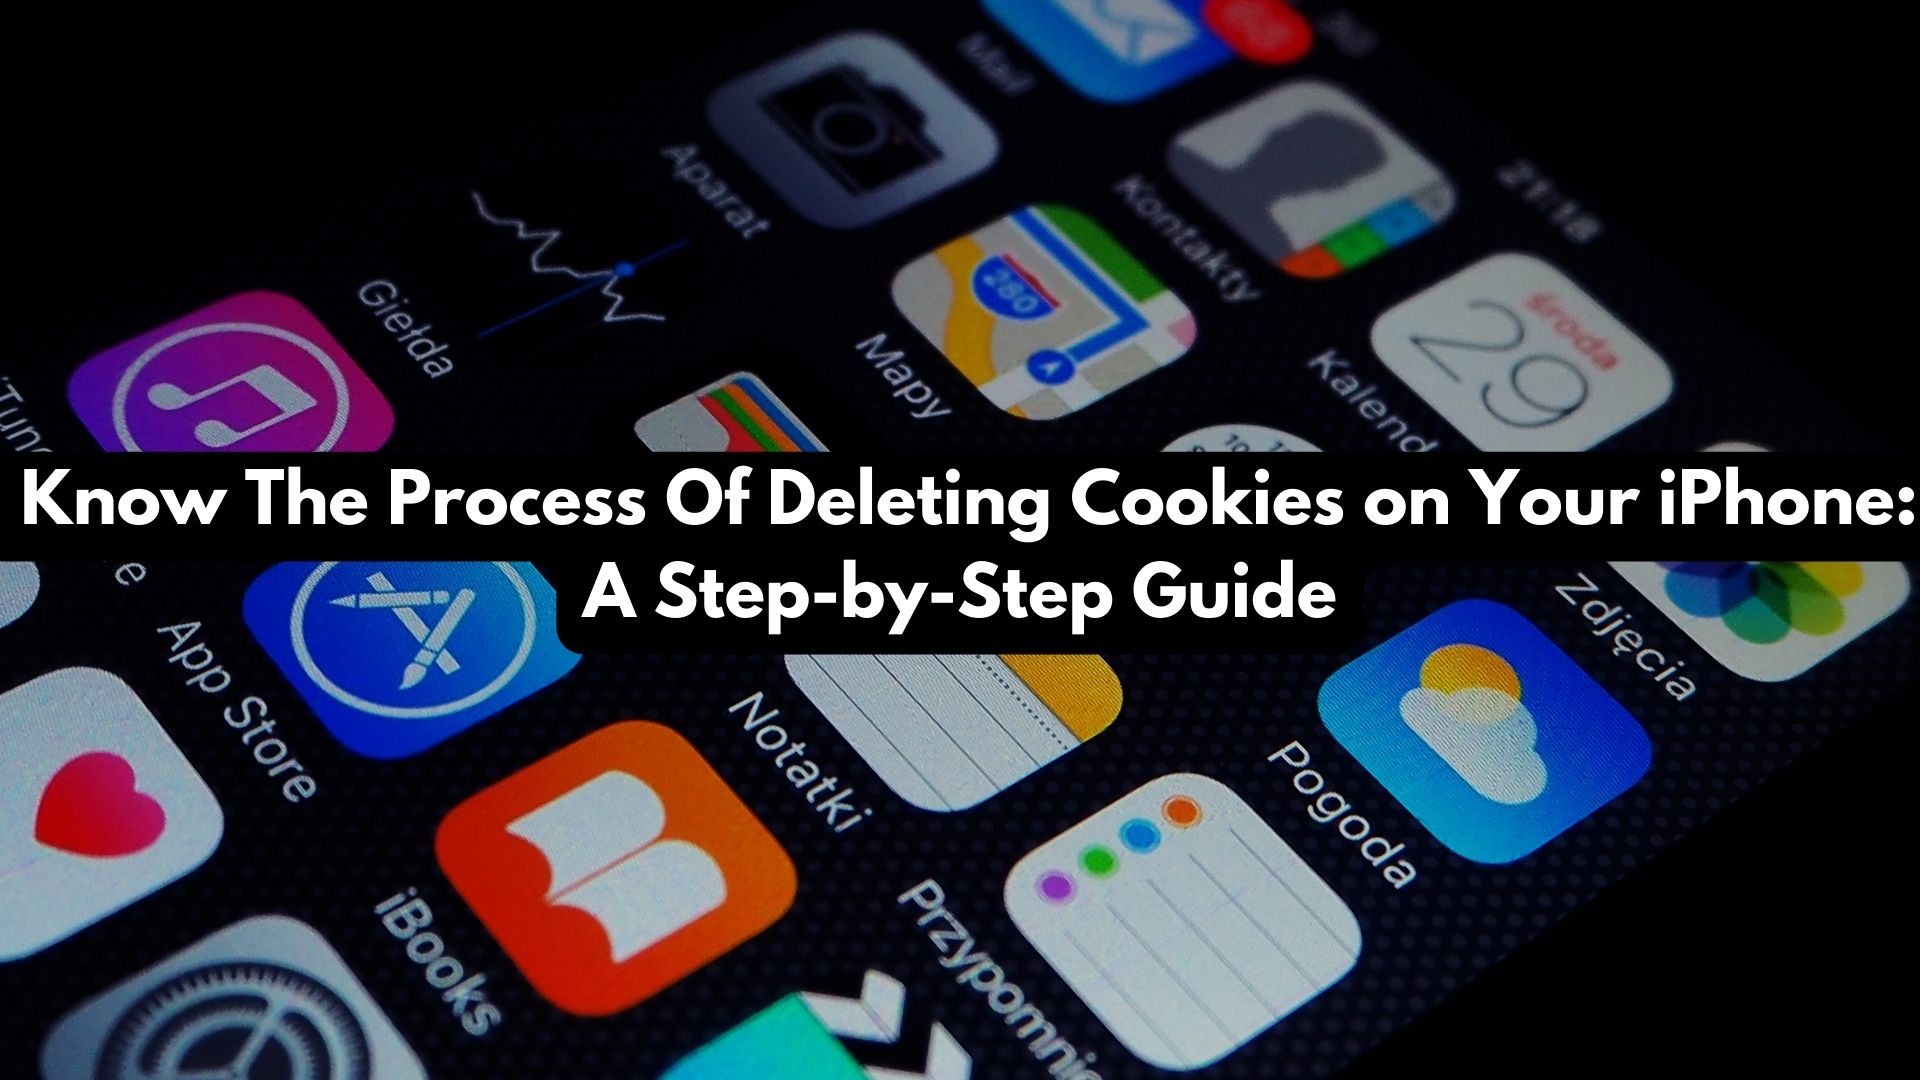 Know The Process Of Deleting Cookies on Your iPhone: A Step-by-Step Guide